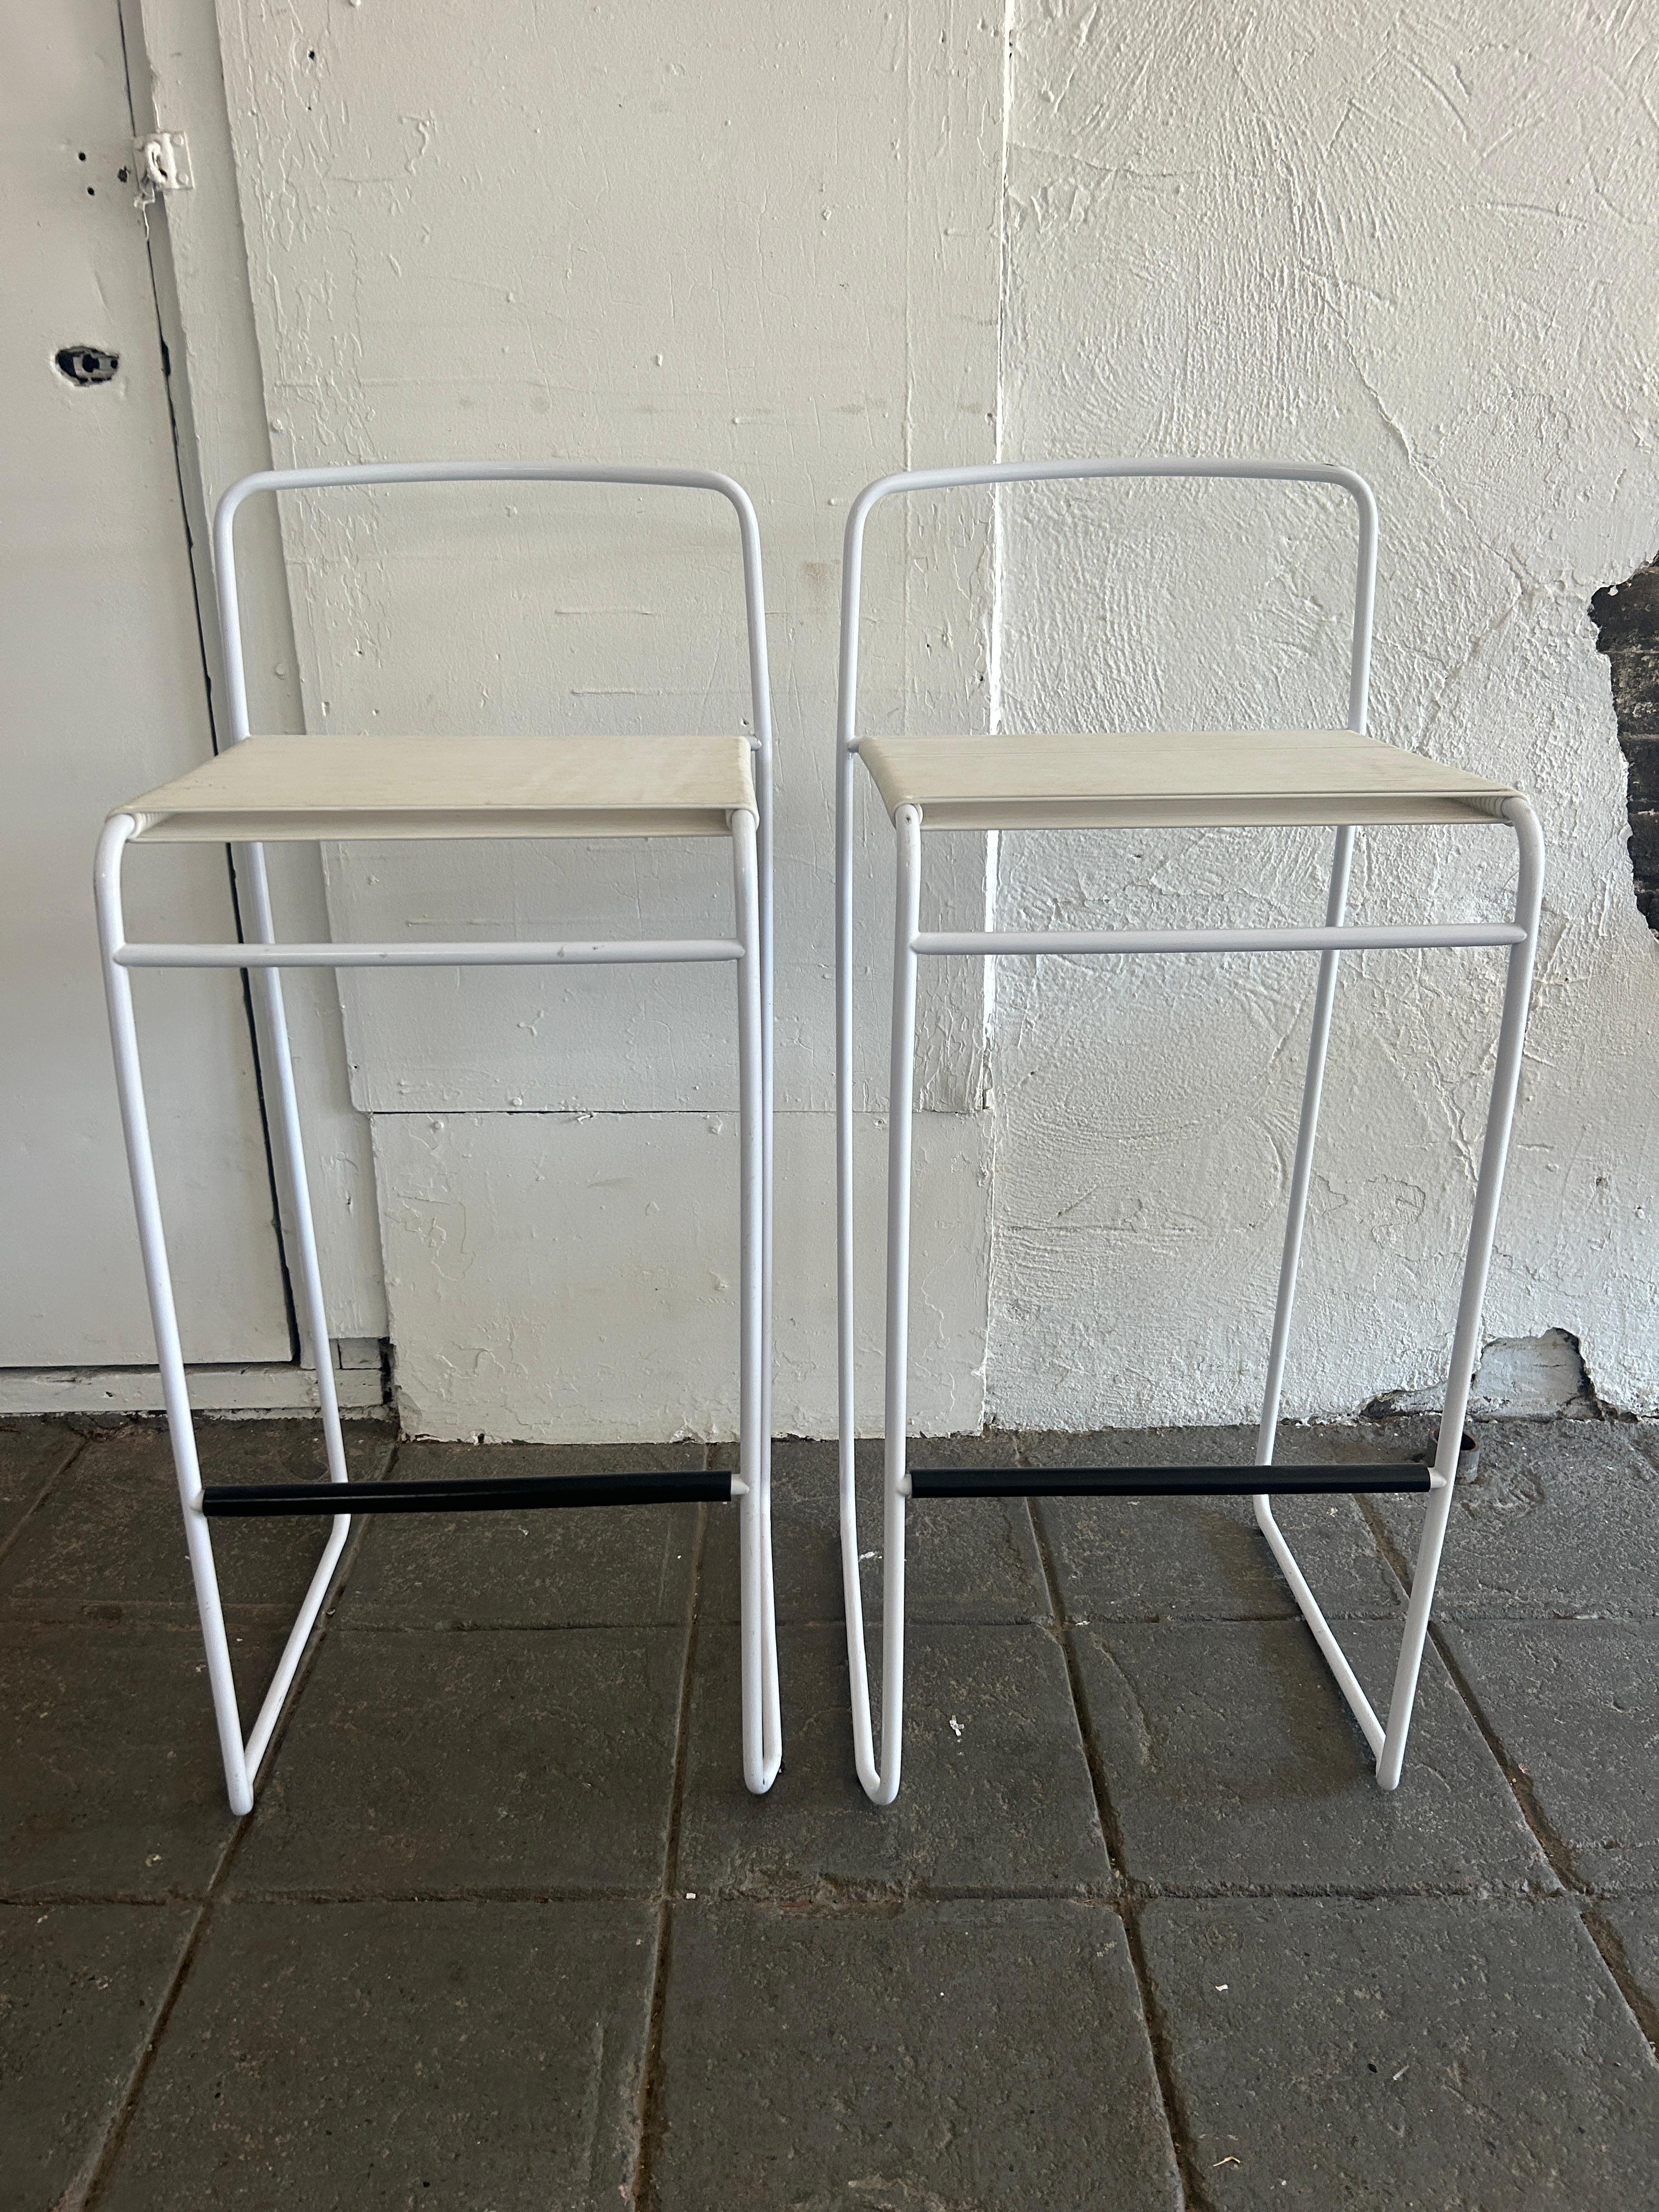 Pair of Post modern bar stools in white enameled metal with spaghetti corded seats designed by Giandomenico Belotti for fly line. good condition. Located in Brooklyn NYC 

Dimensions: H 37” x W 16